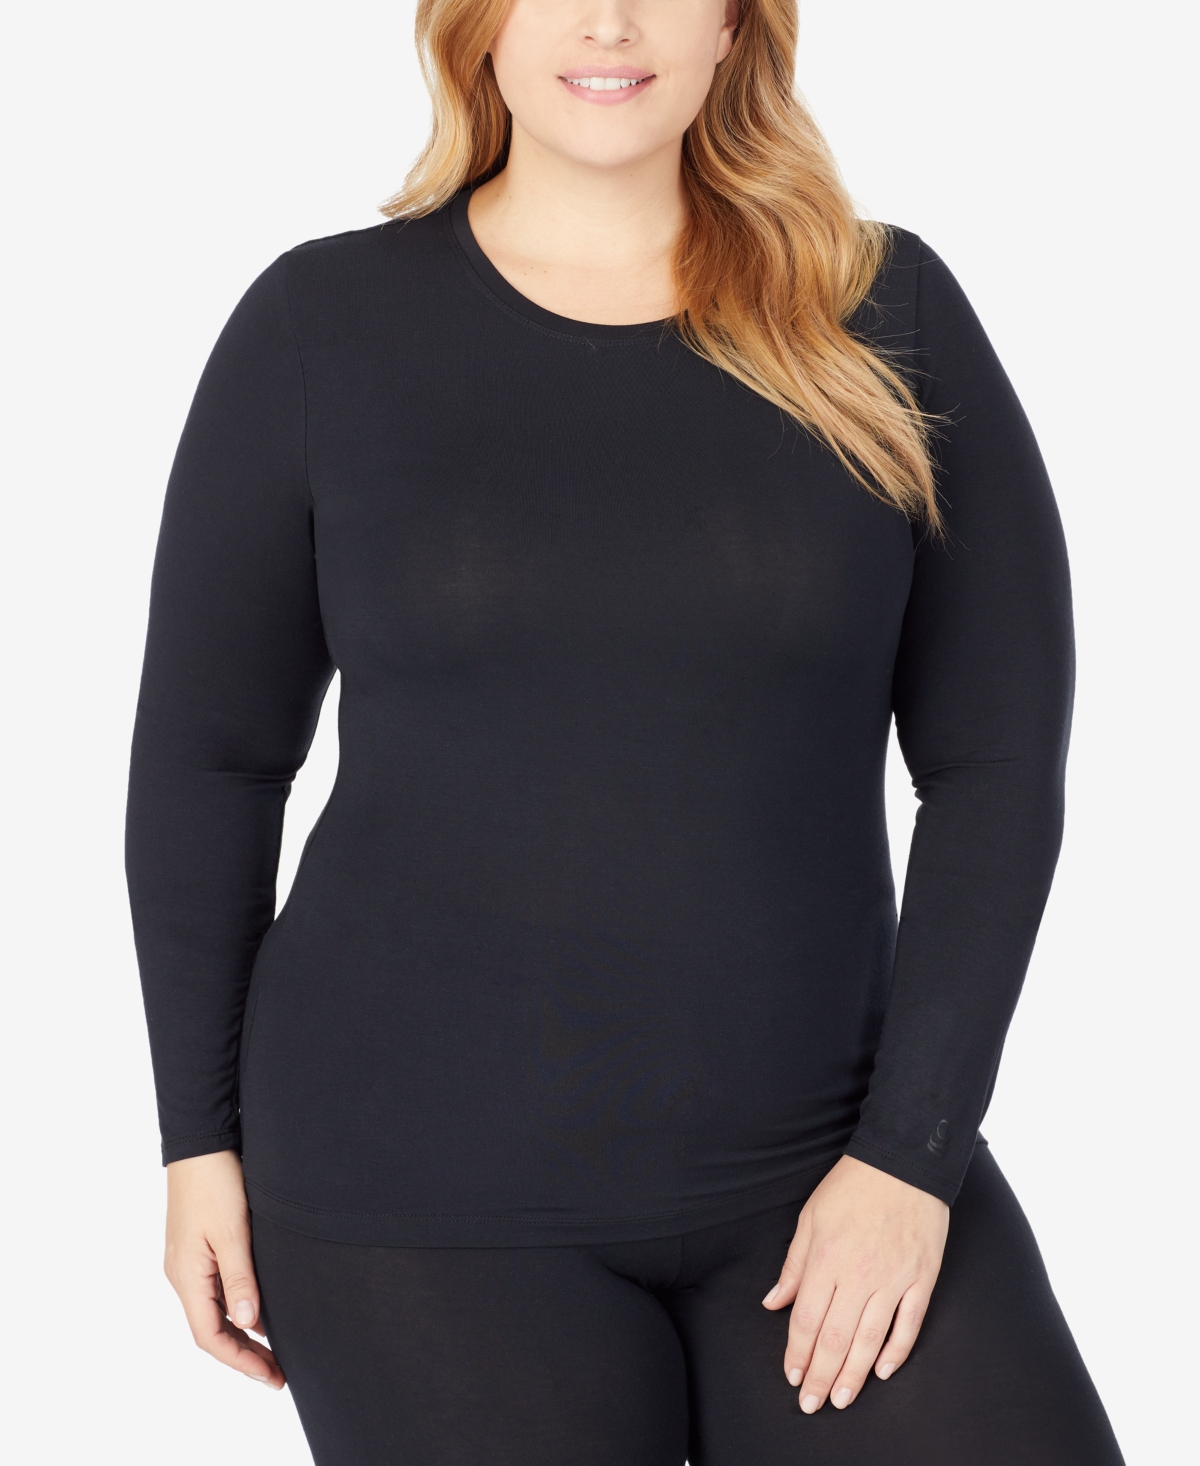 Plus Size Softwear with Stretch Long Sleeve Top - Black